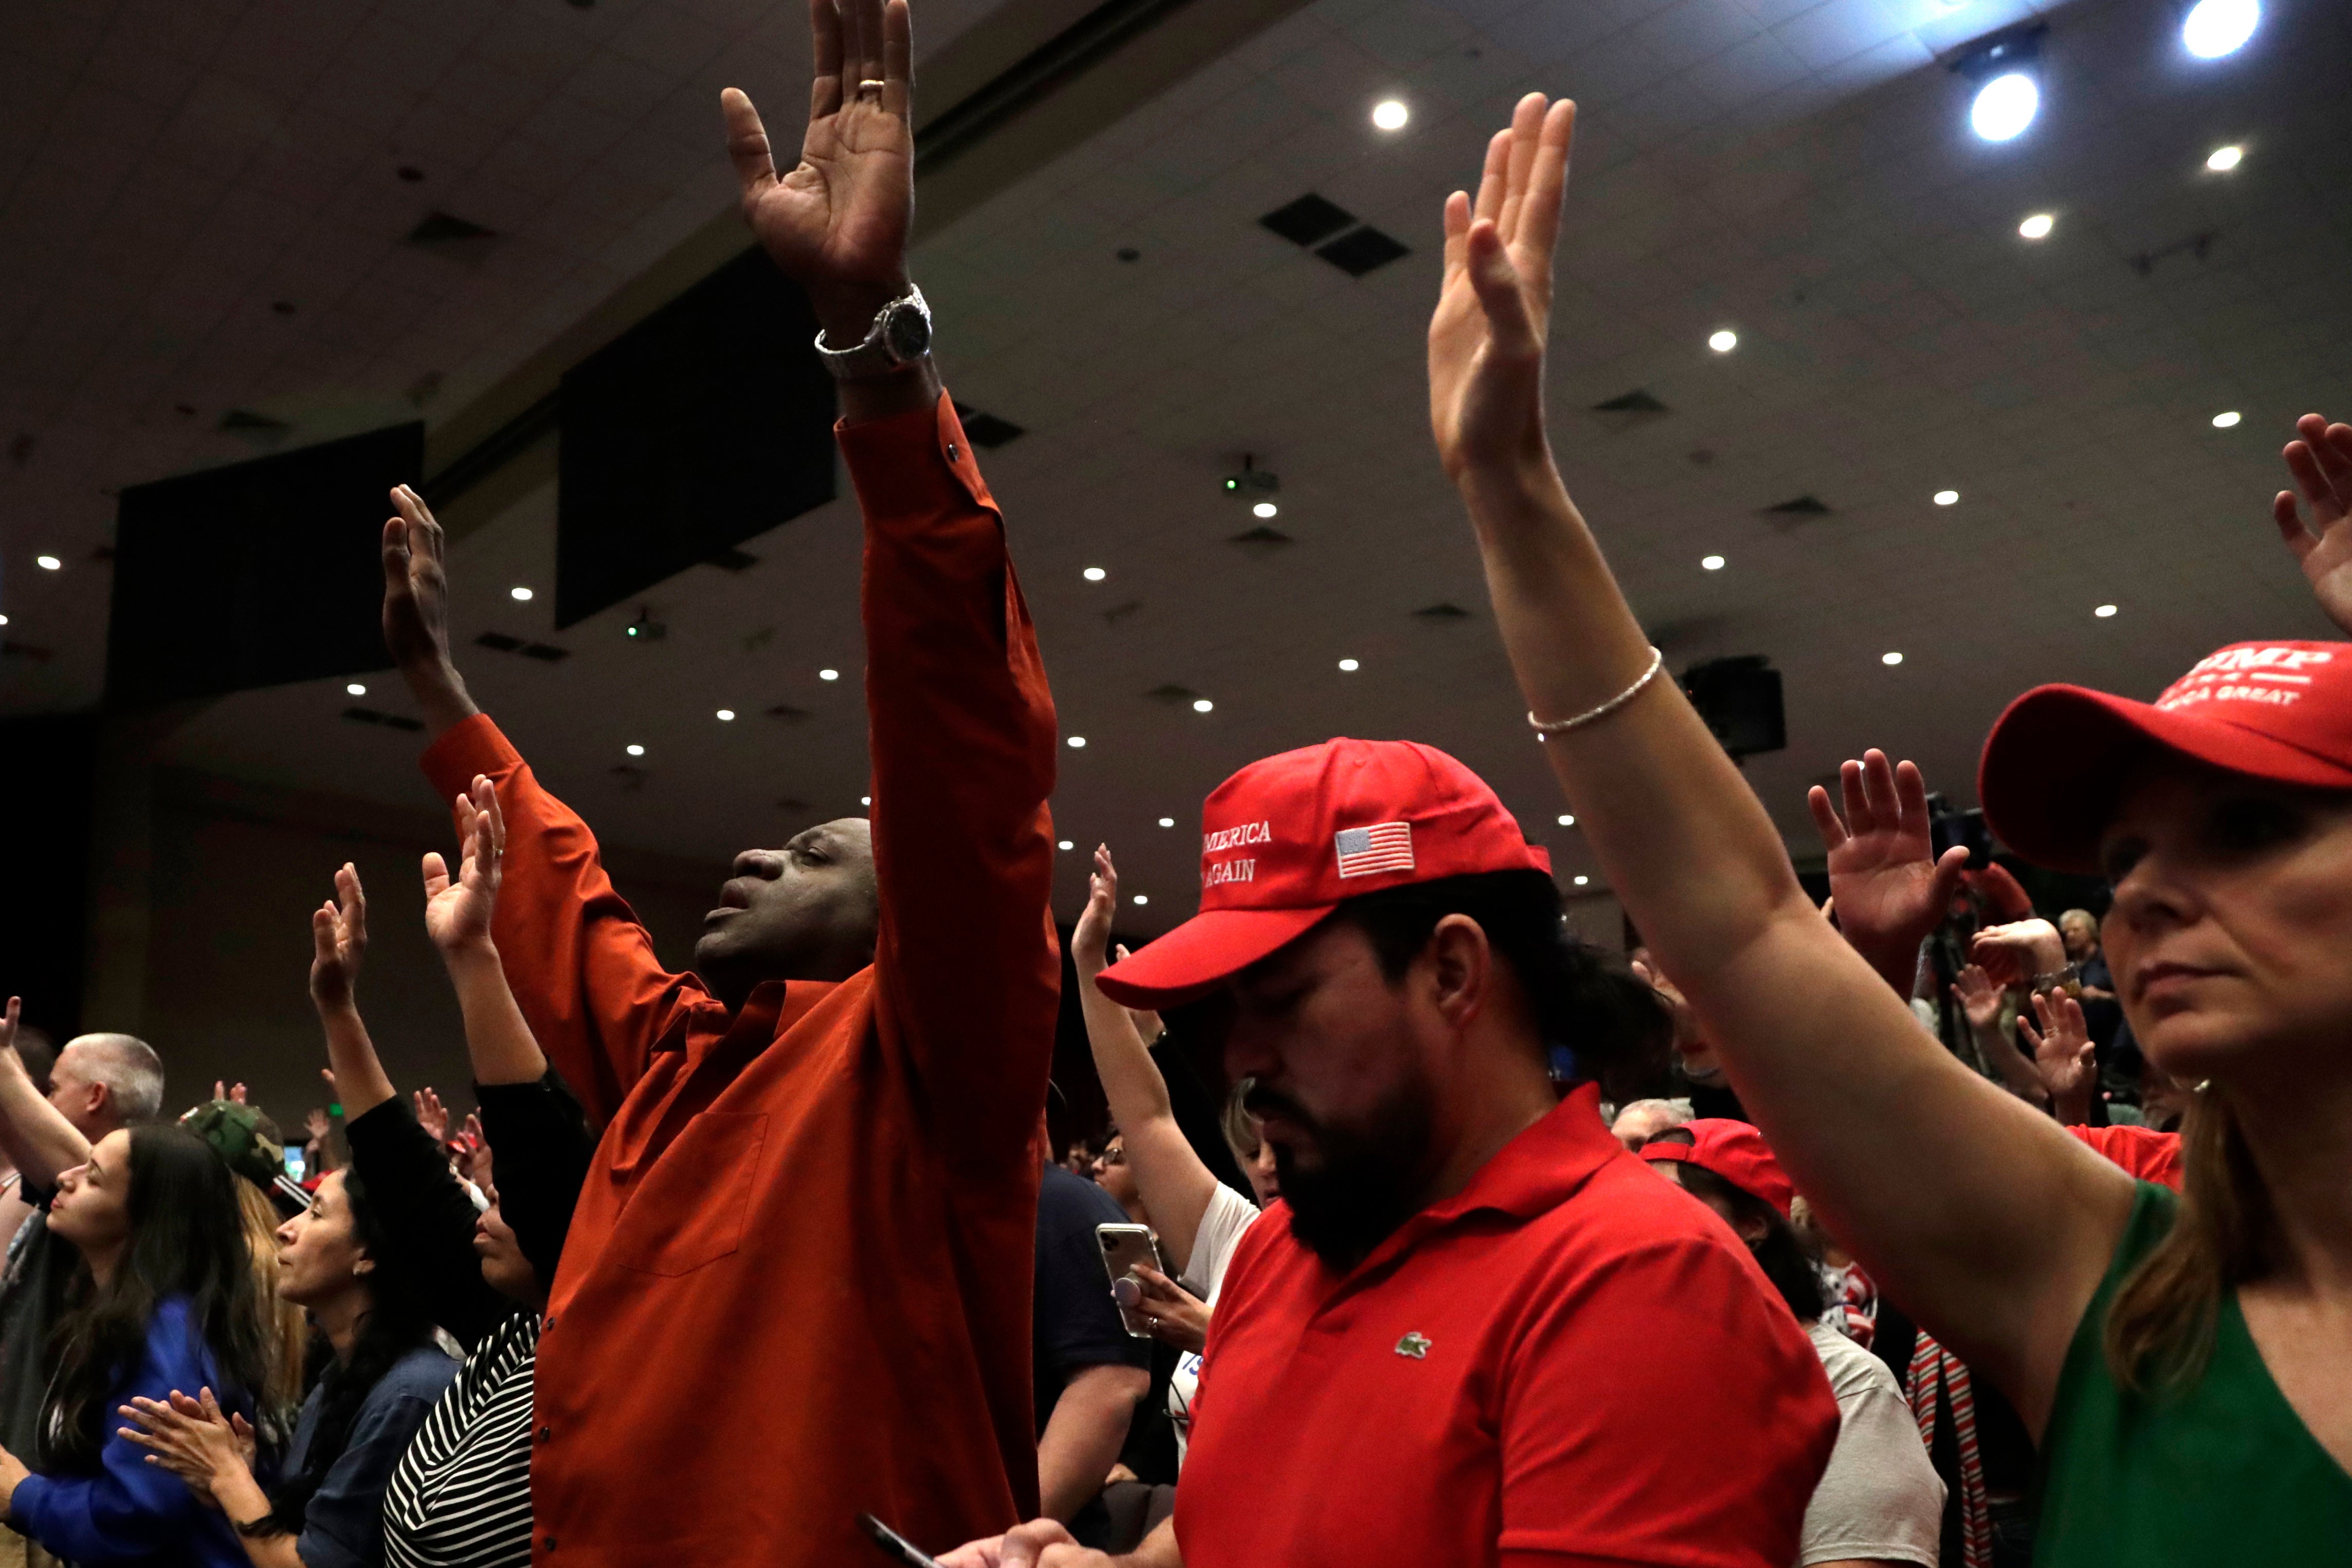 People raise their arms in prayer during a rally for evangelical supporters of President Donald Trump at the King Jesus International Ministry church, Friday, Jan. 3, 2020, in Miami.